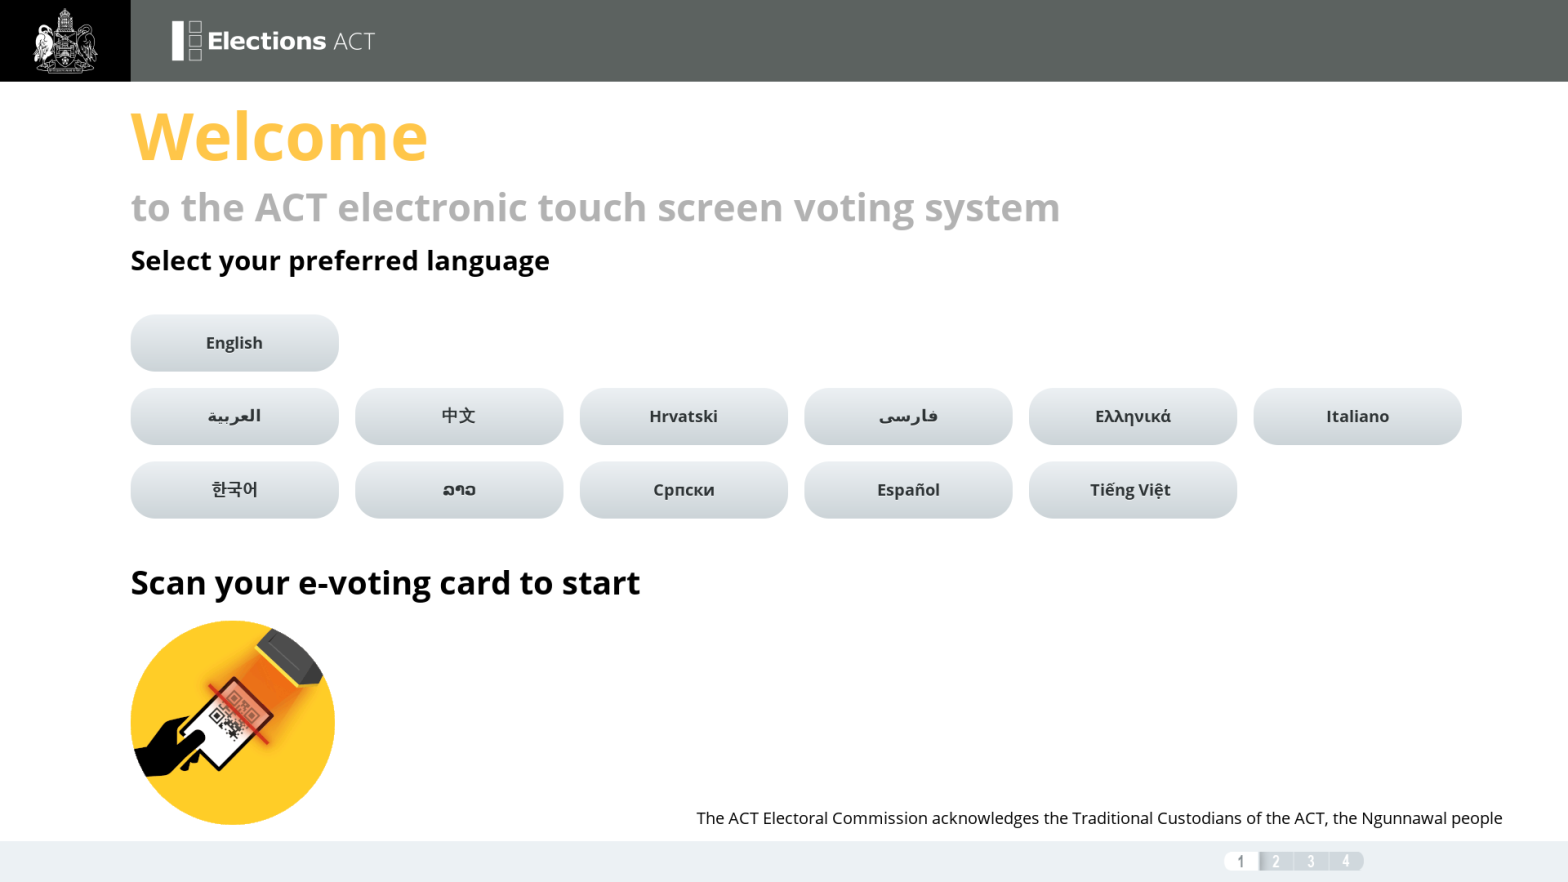 A screenshot of the electronic vote counting system used by Elections ACT